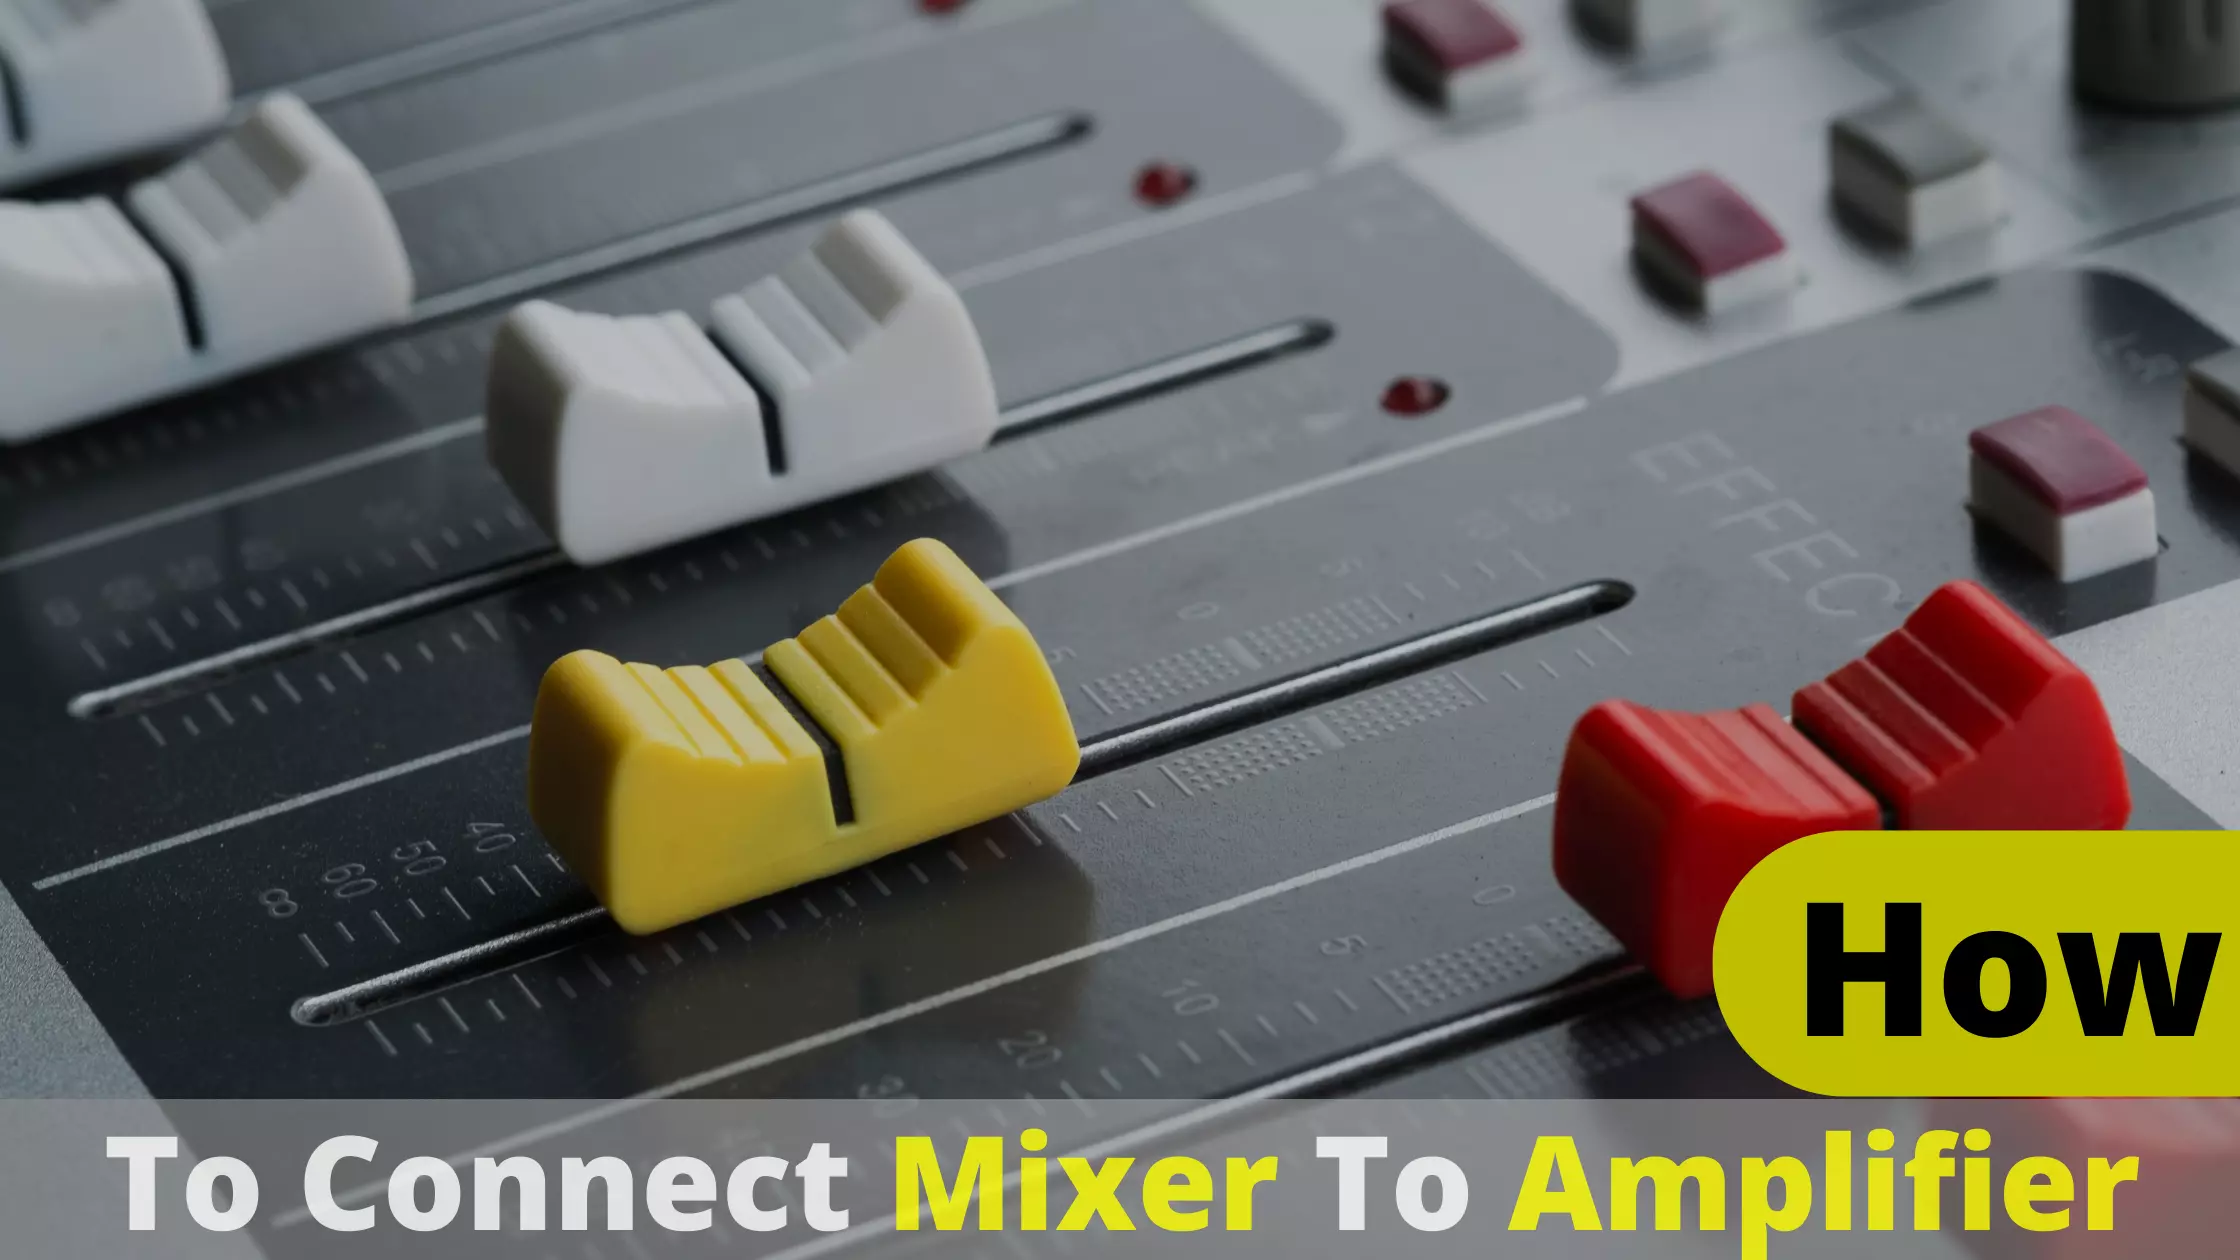 How to Connect a Mixer to an Amplifier? The Definitive Guide